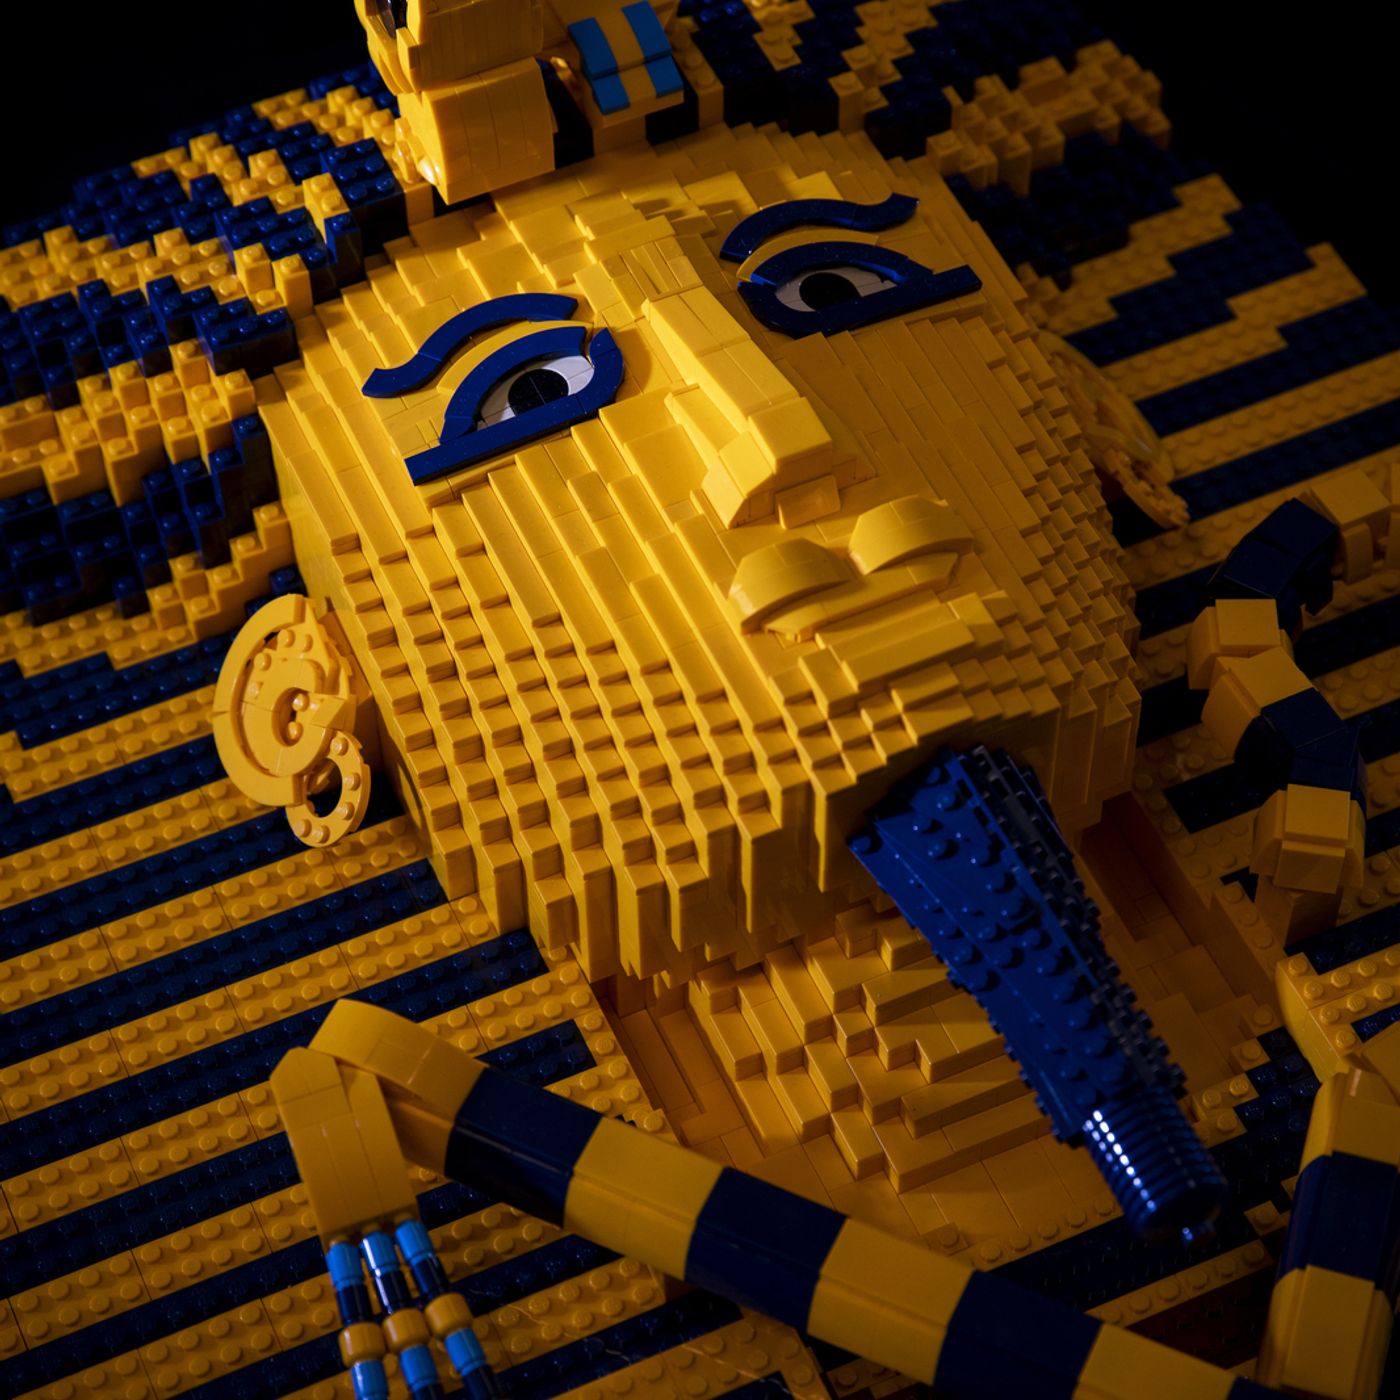 35: Lego Tutankhamun and Lego in a museum context with The Brickman